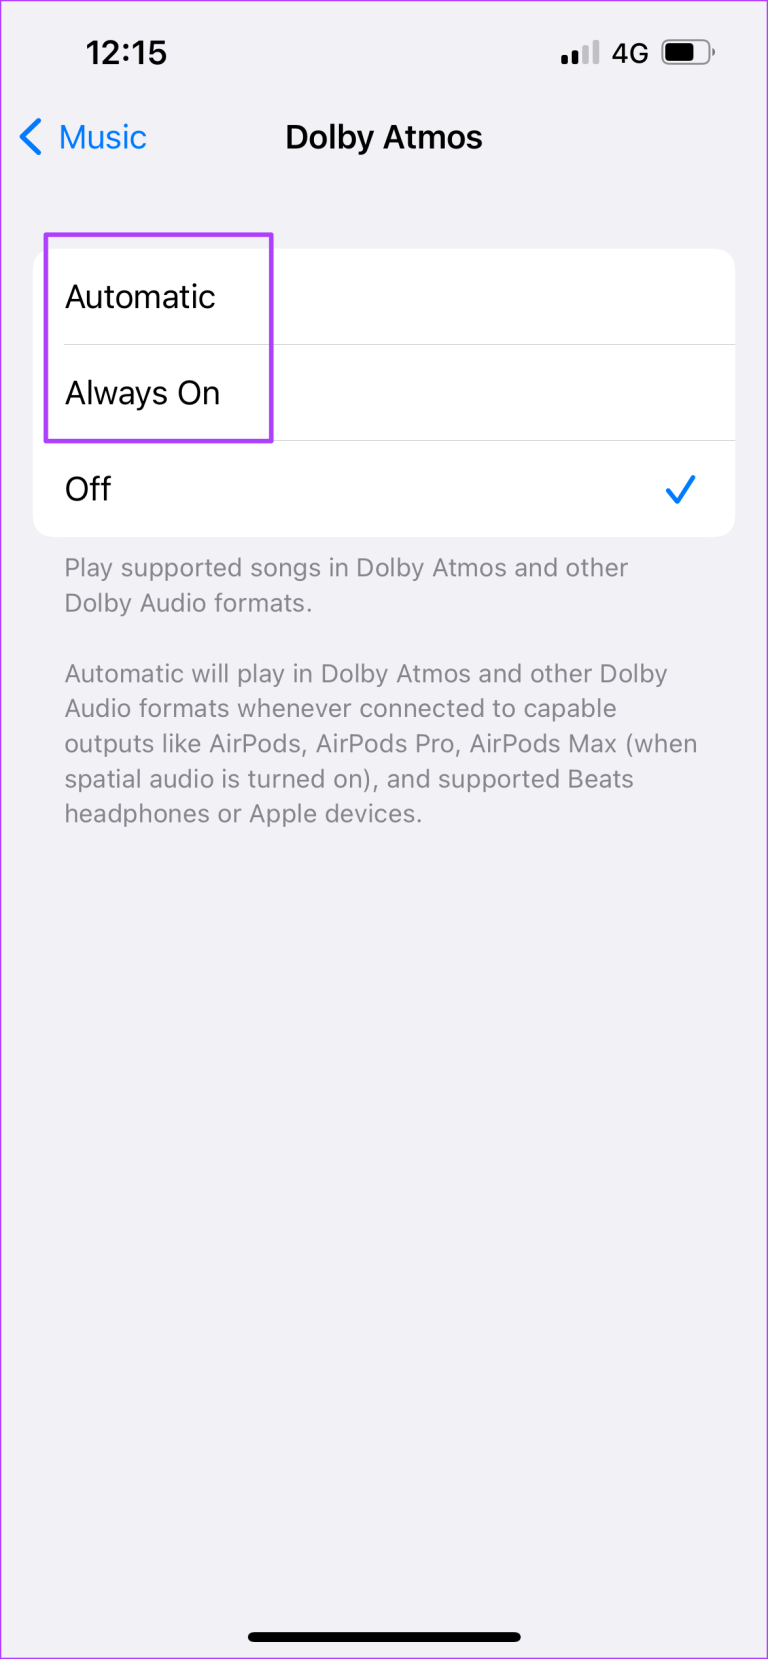 MacBook Pro supports Dolby Atmos sound